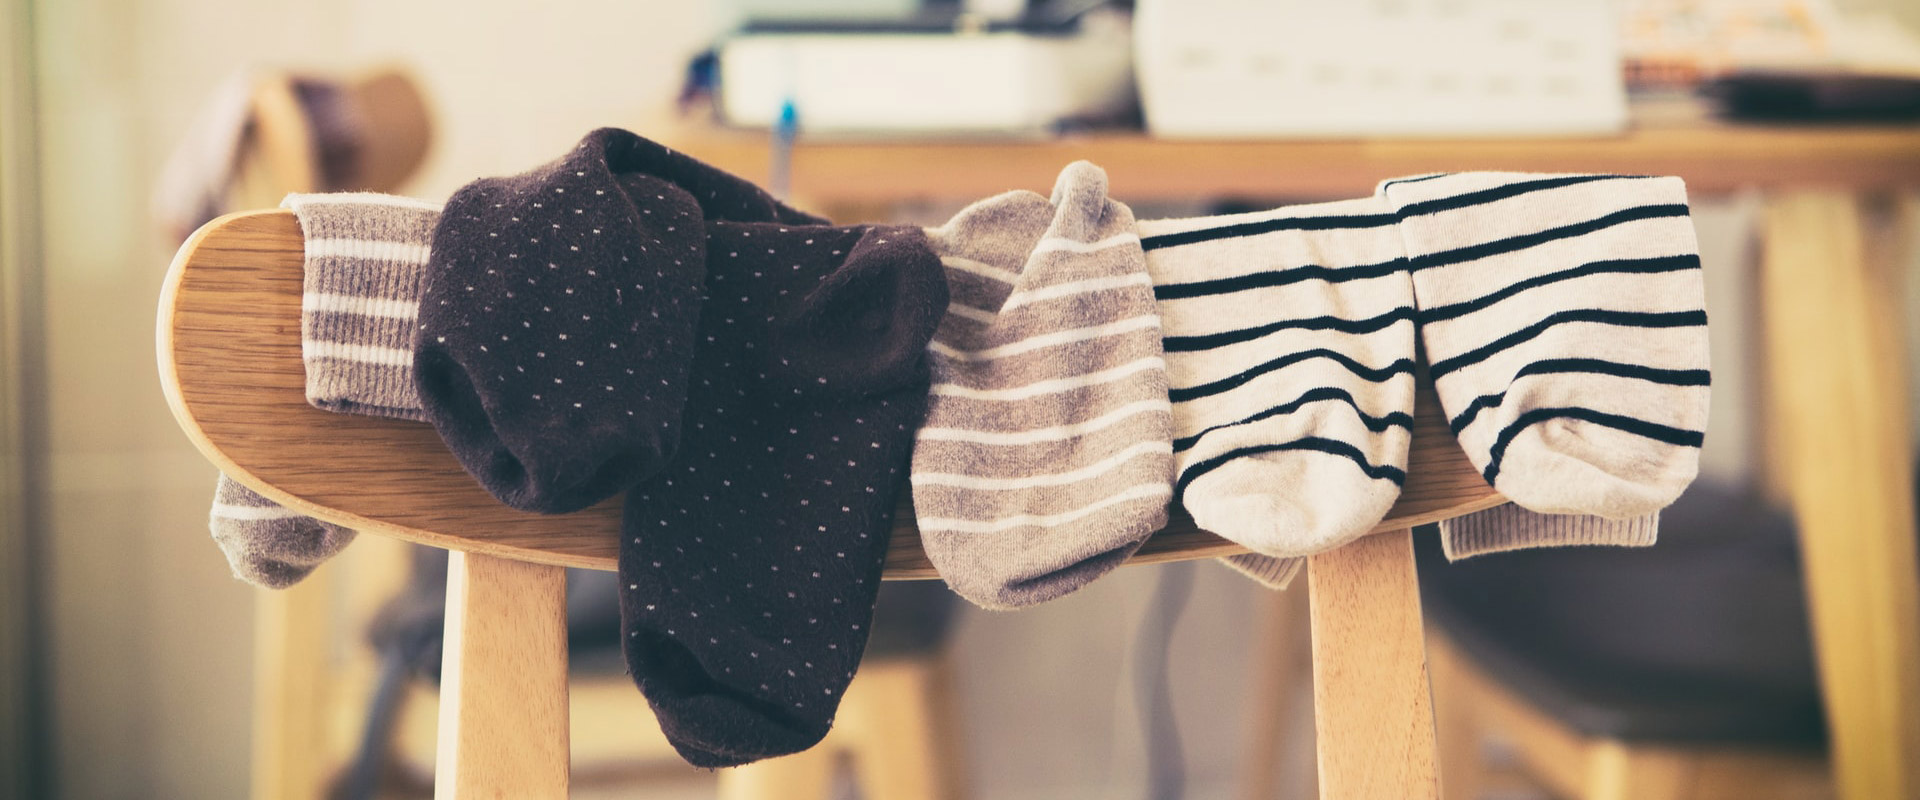 What are the styles of newborn socks